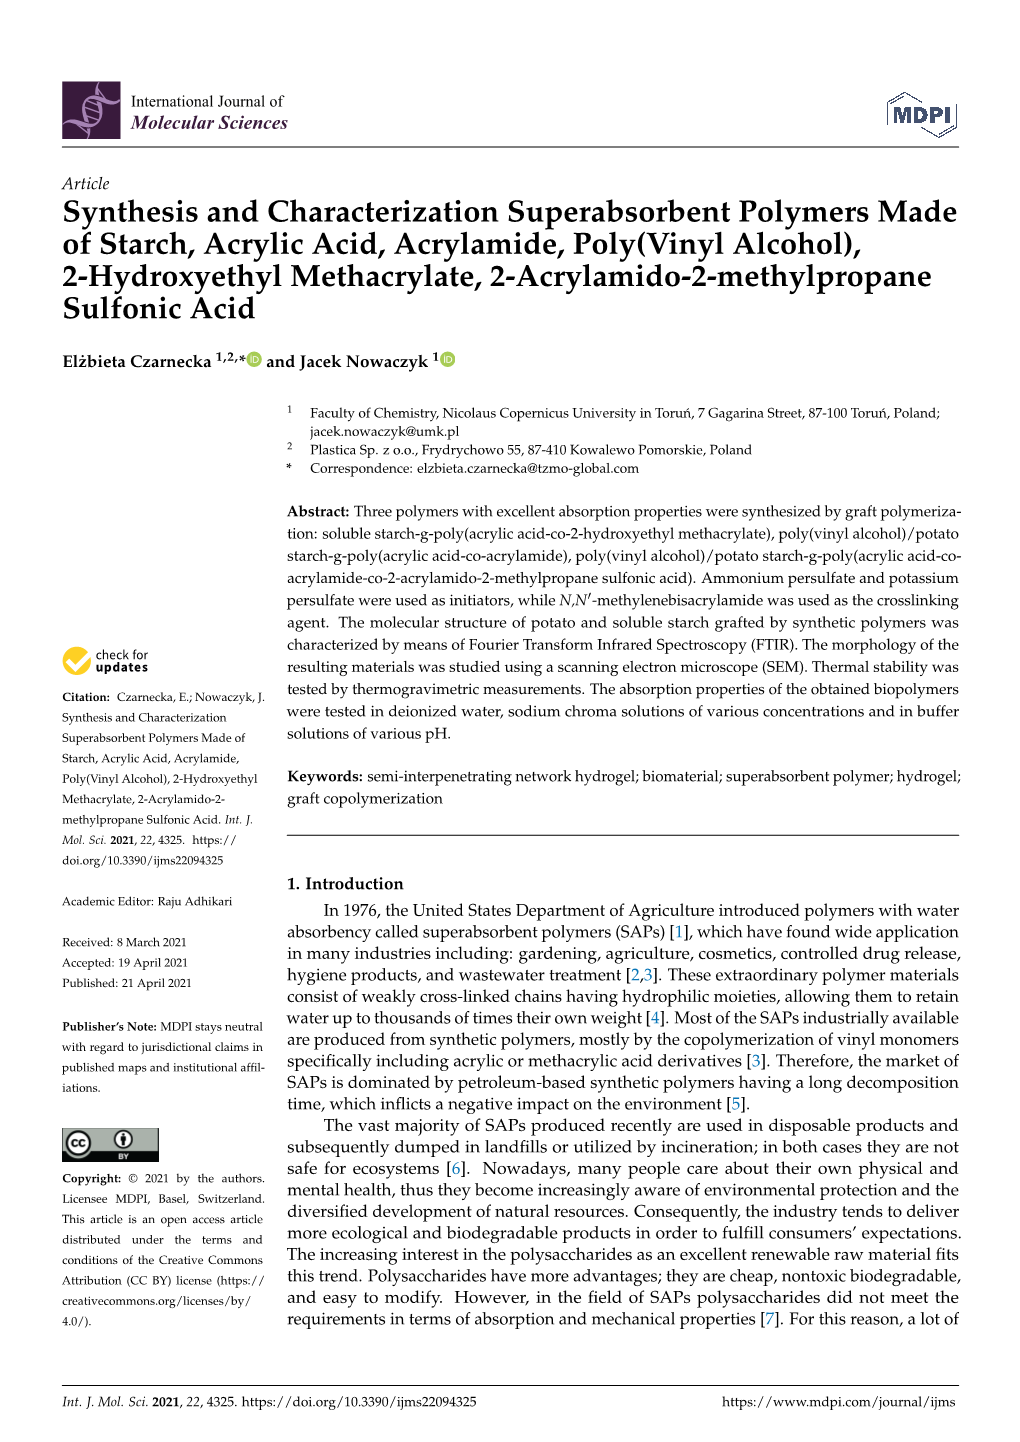 Synthesis and Characterization Superabsorbent Polymers Made of Starch, Acrylic Acid, Acrylamide, Poly(Vinyl Alcohol), 2-Hydroxye